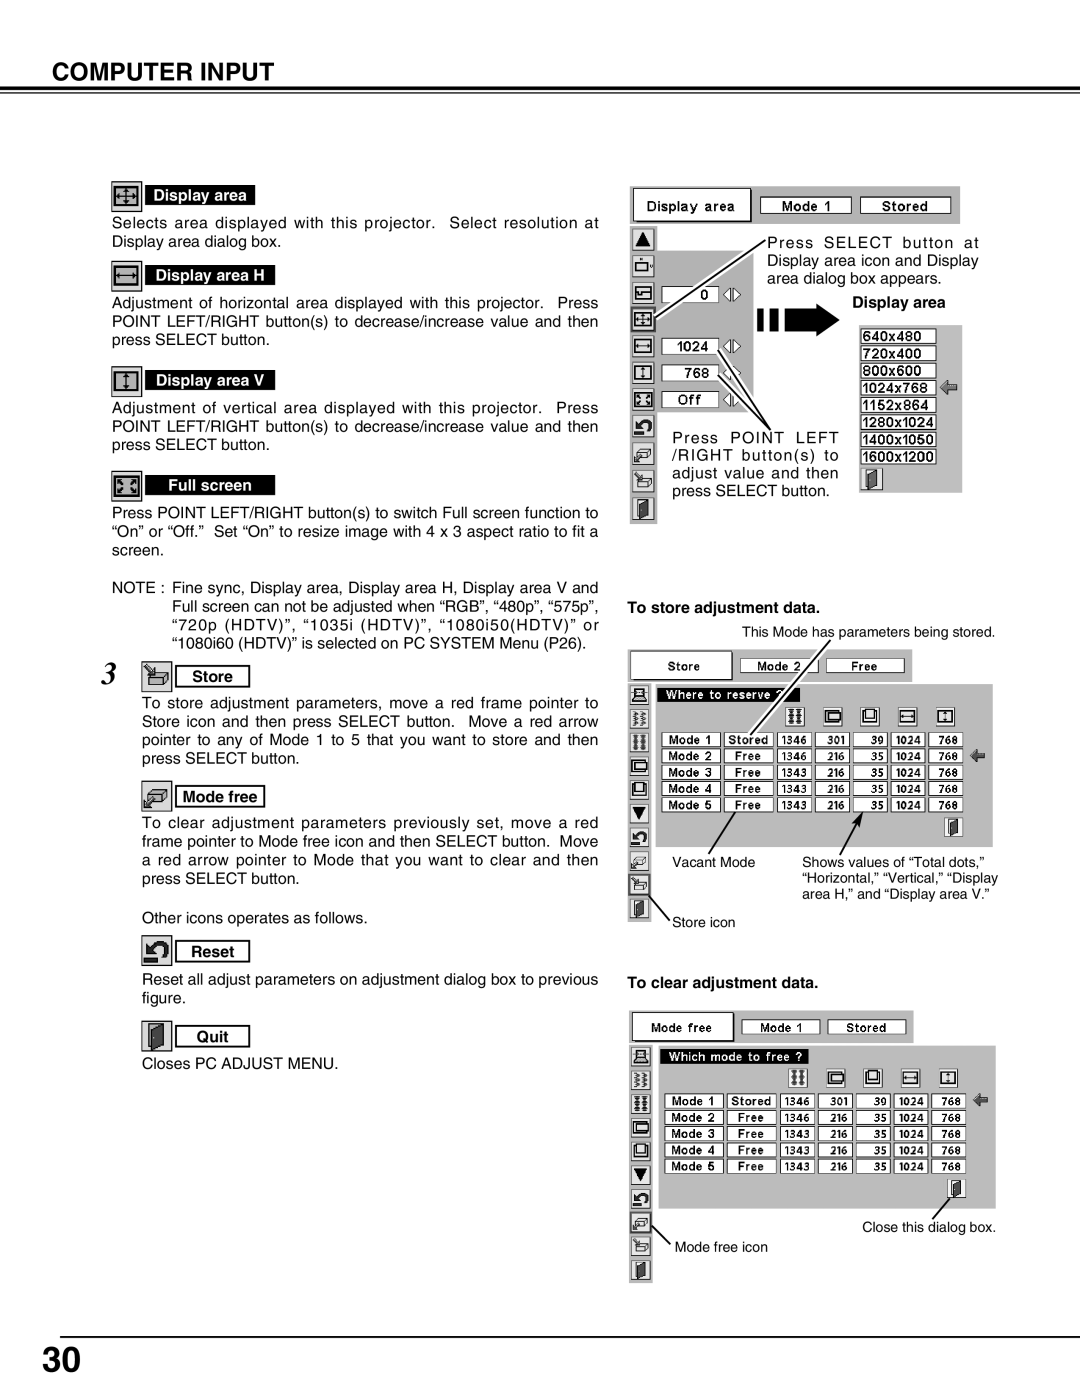 Christie Digital Systems 38-VIV302-01 user manual Computer Input, Store, Mode free, Reset, Quit, Display area 